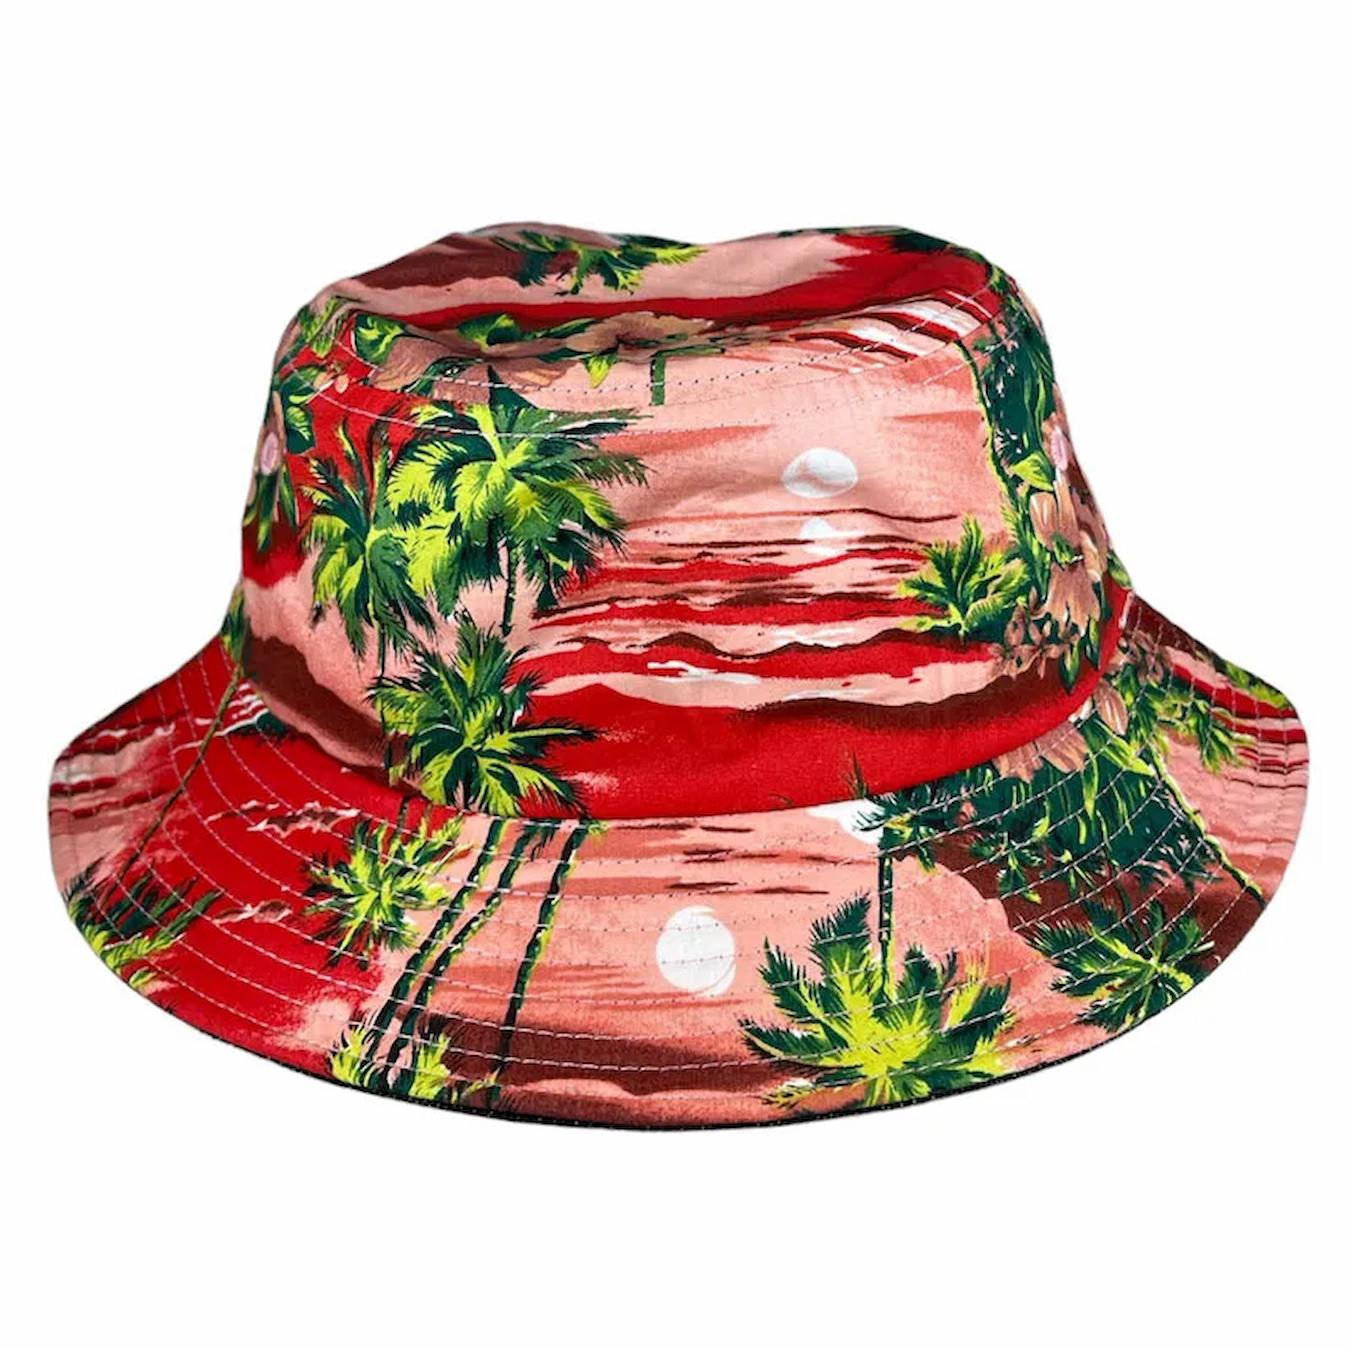 the sunset bucket hat from double portion supply difference between a hat baseball cap trucker hats unshaped crown baseball cap